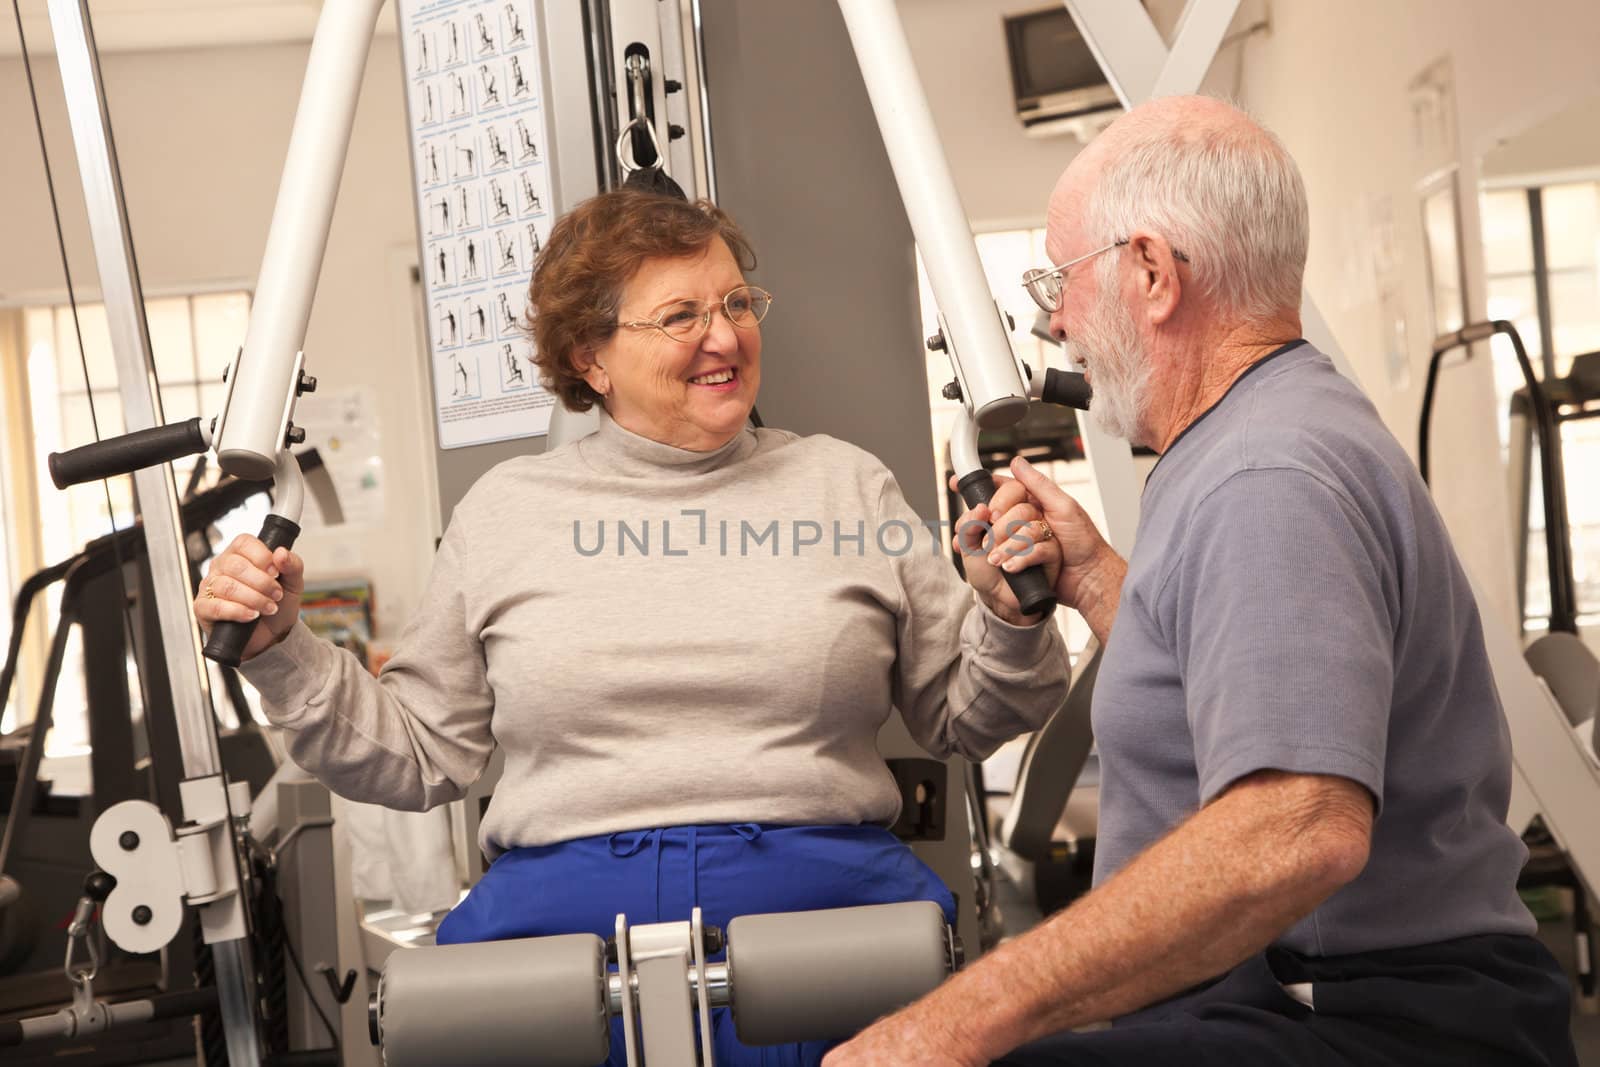 Active Senior Adult Couple Working Out Together in the Gym.